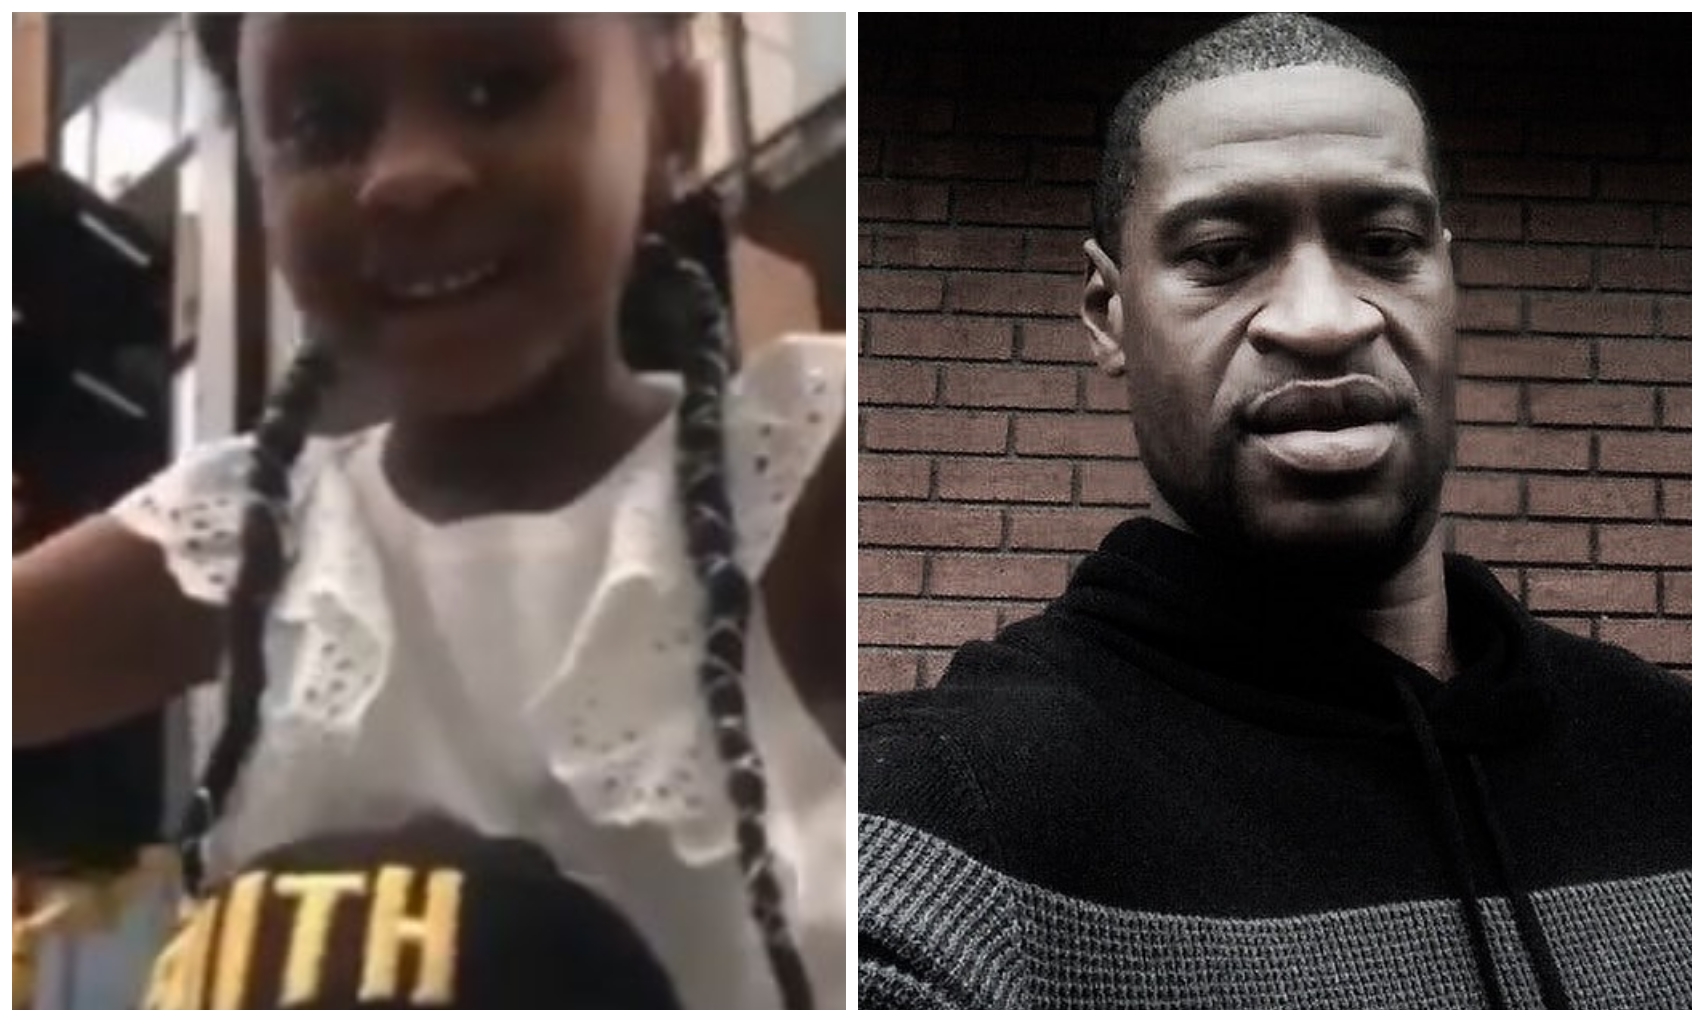 "Daddy changed the world" - George Floyd's young daughter, Gianna "GiGi" Floyd says (Video)